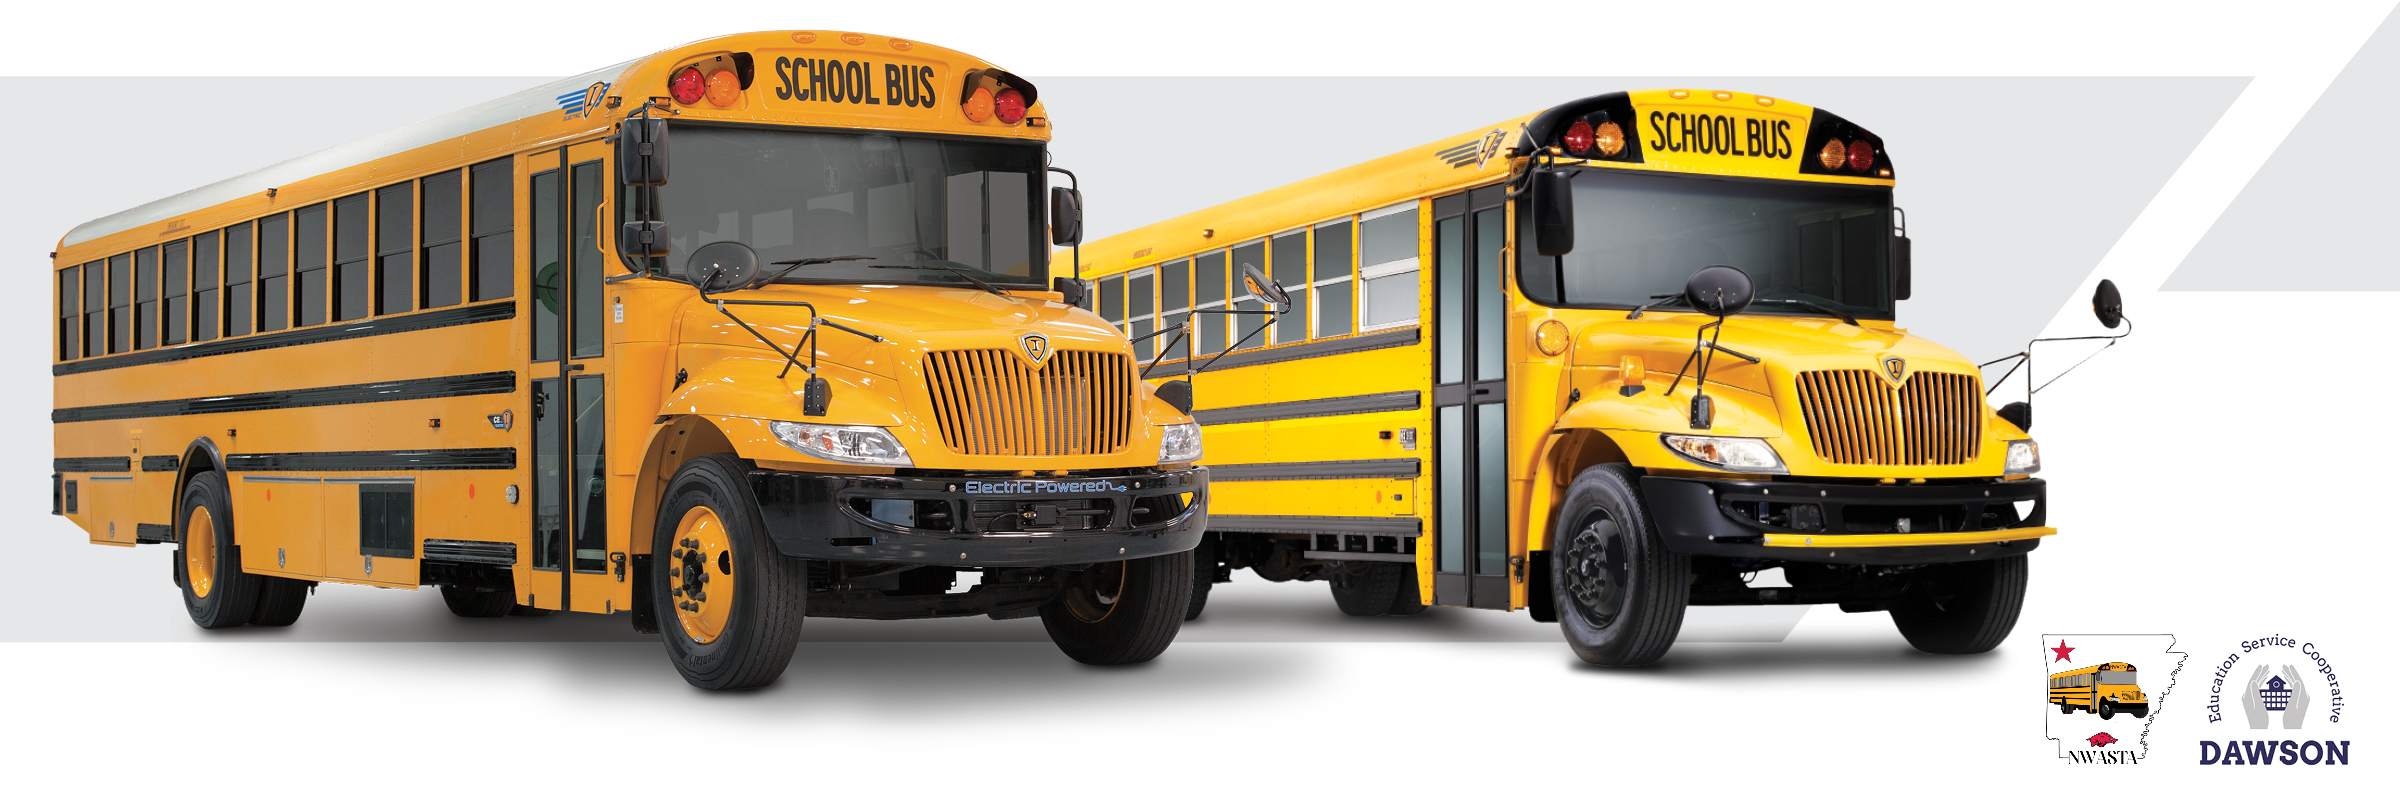 Two IC Buses, IC Bus Logo, North West Arkansas Student Transportation Association Logo and Dawson Education Services Cooperative Logo